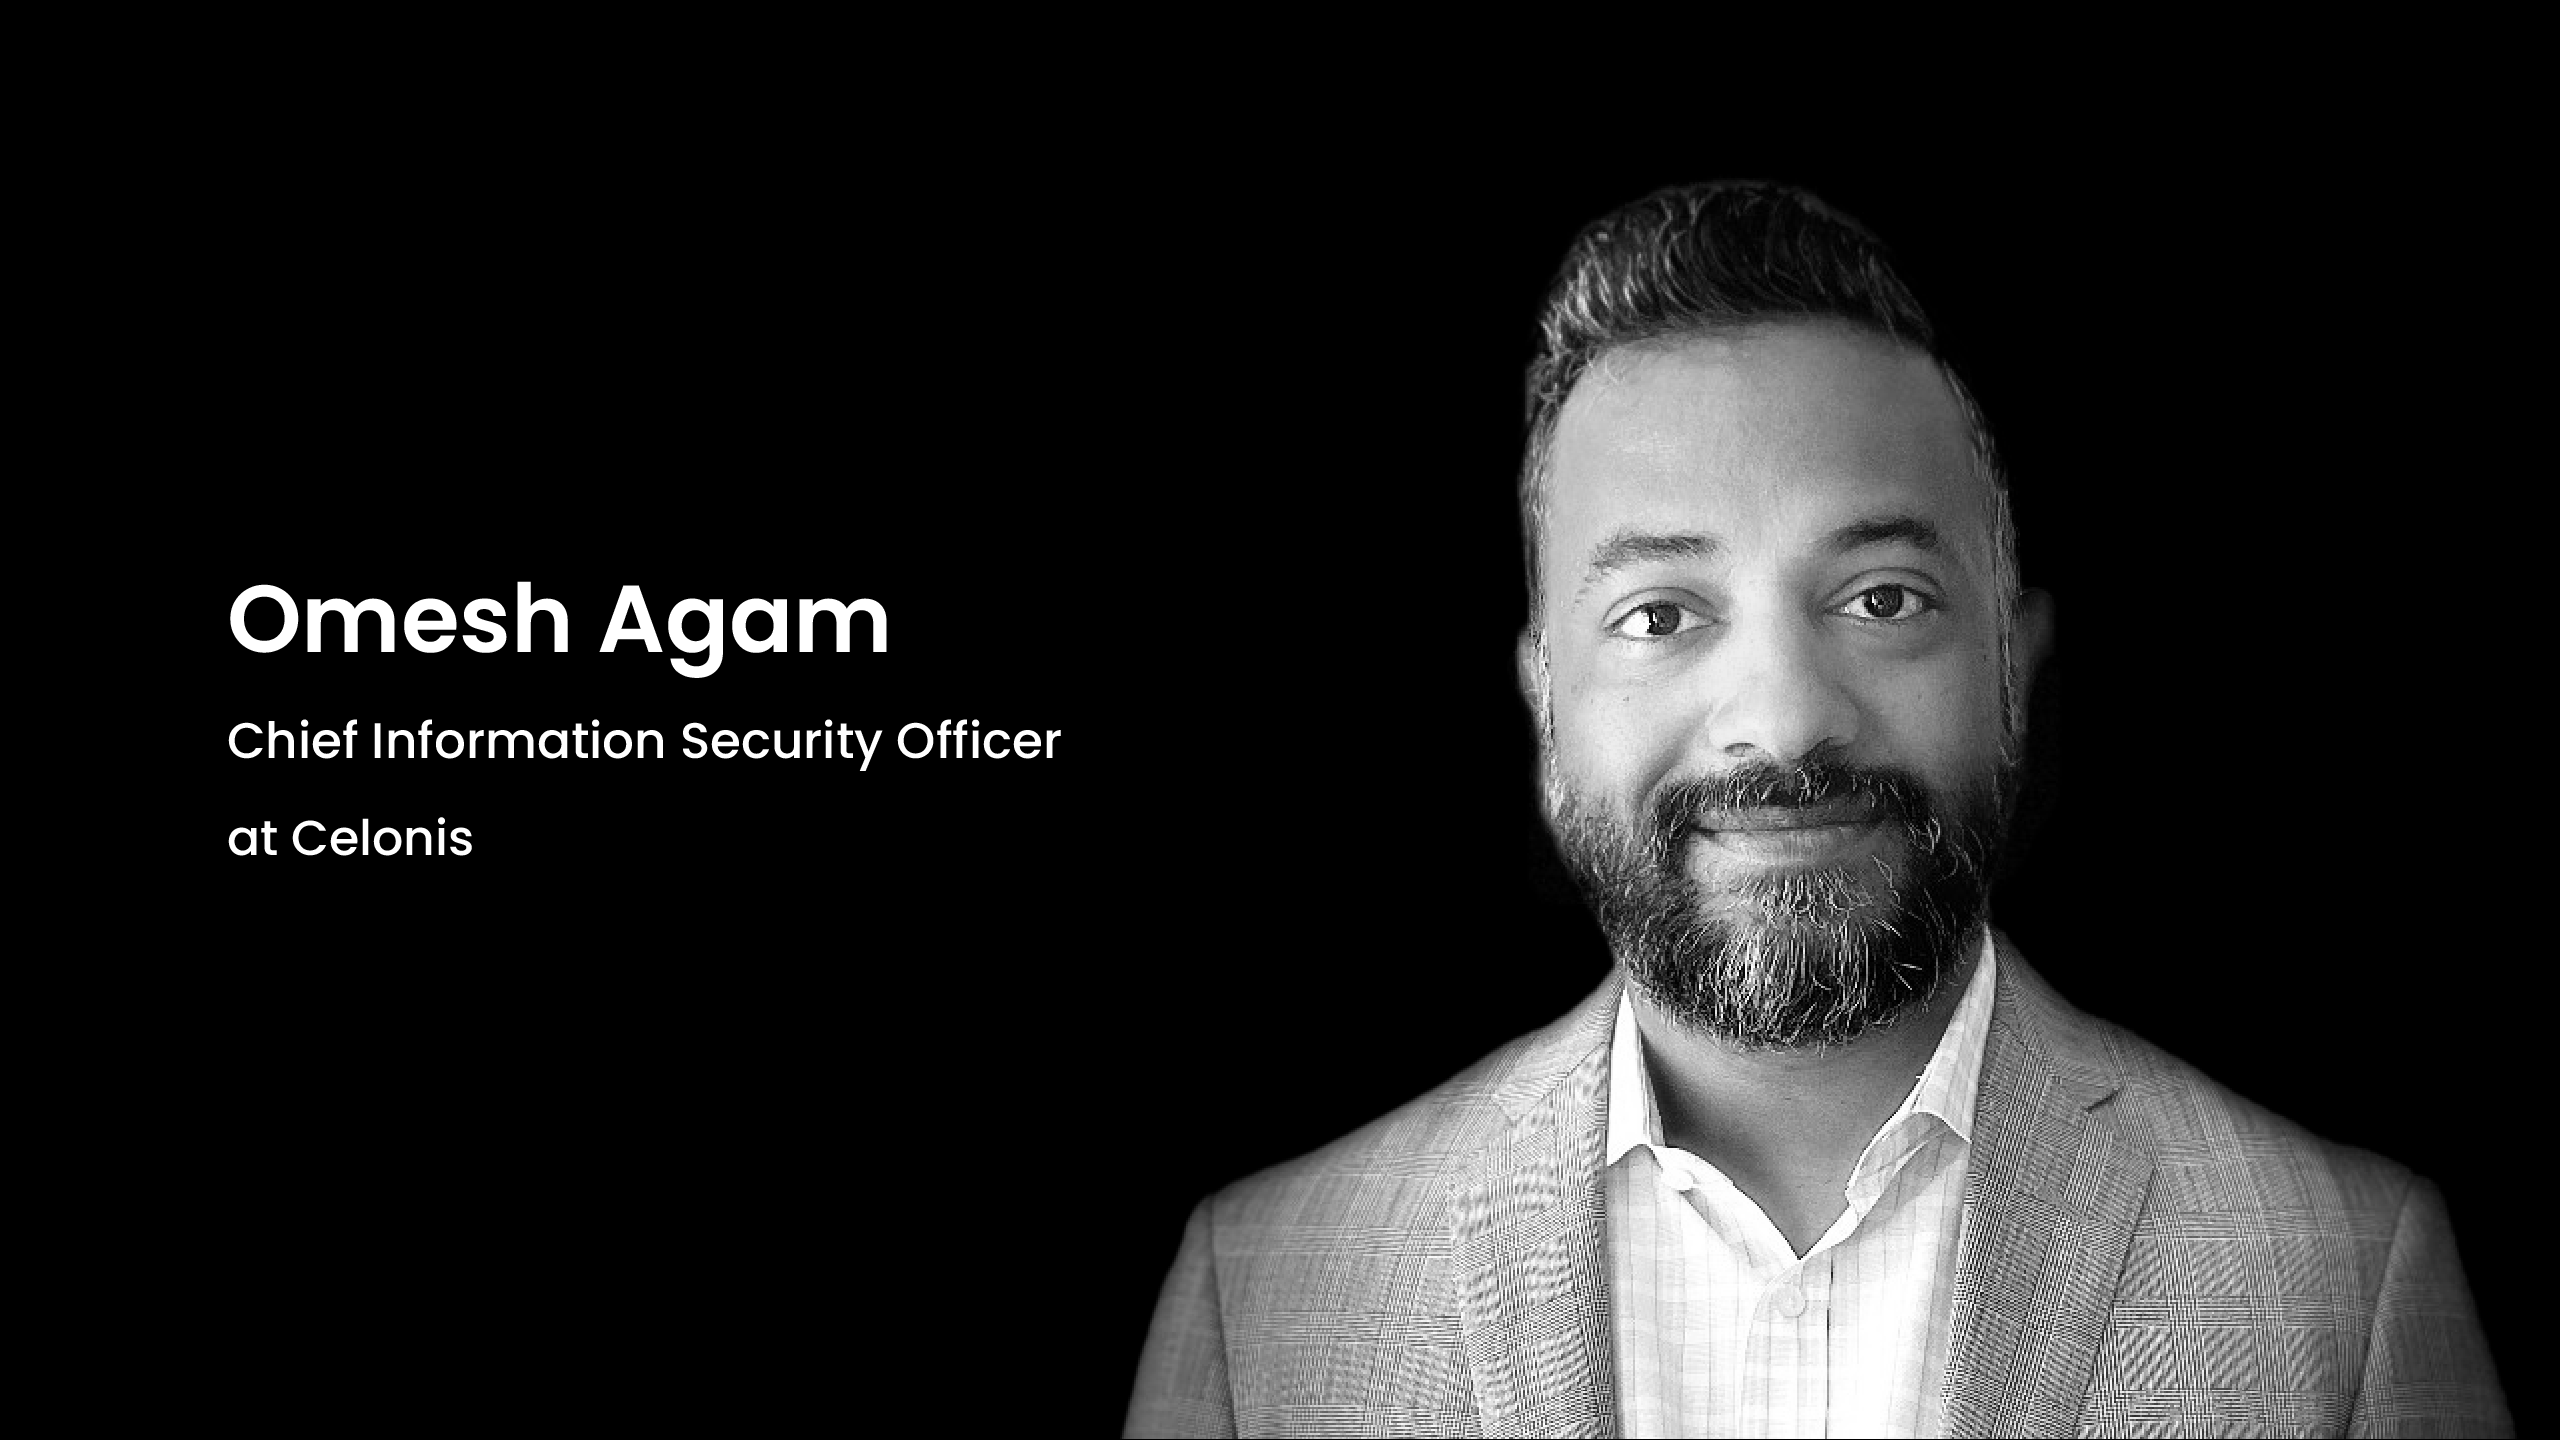 Celonis' Omesh Agam, Chief Information Security Officer, joined the company nearly a year ago and is scaling a cybersecurity unit designed to be integrated with product development and able to secure a multi-cloud architecture that features data streaming.